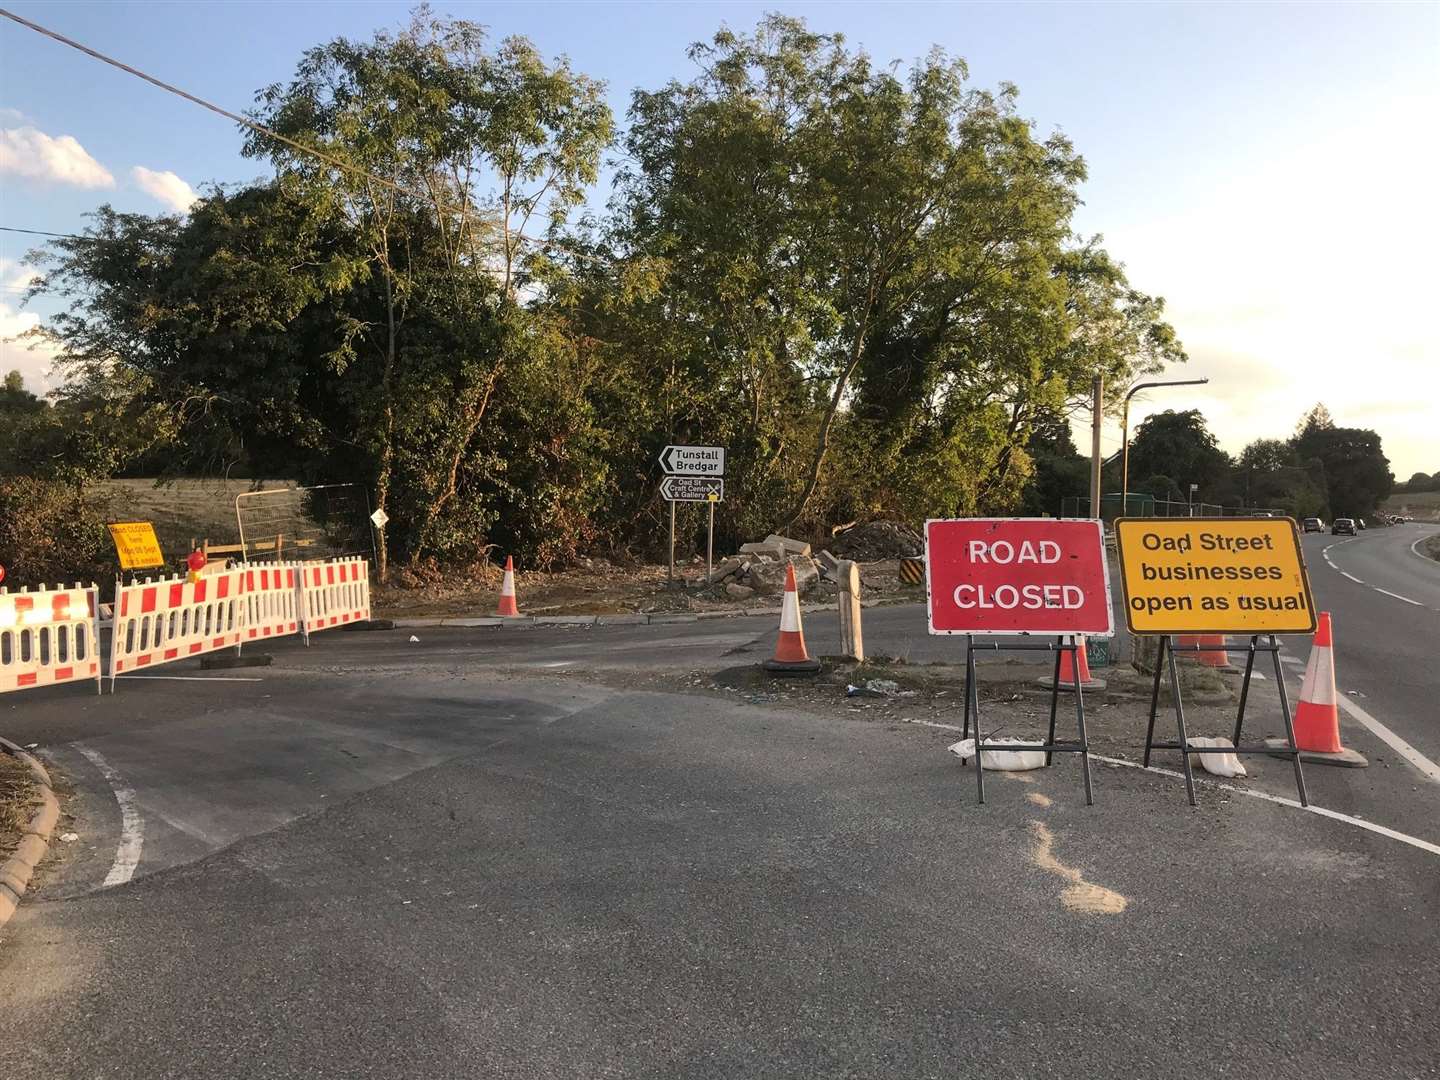 Oad Street is closed as part of the Stockbury Roundabour revamp